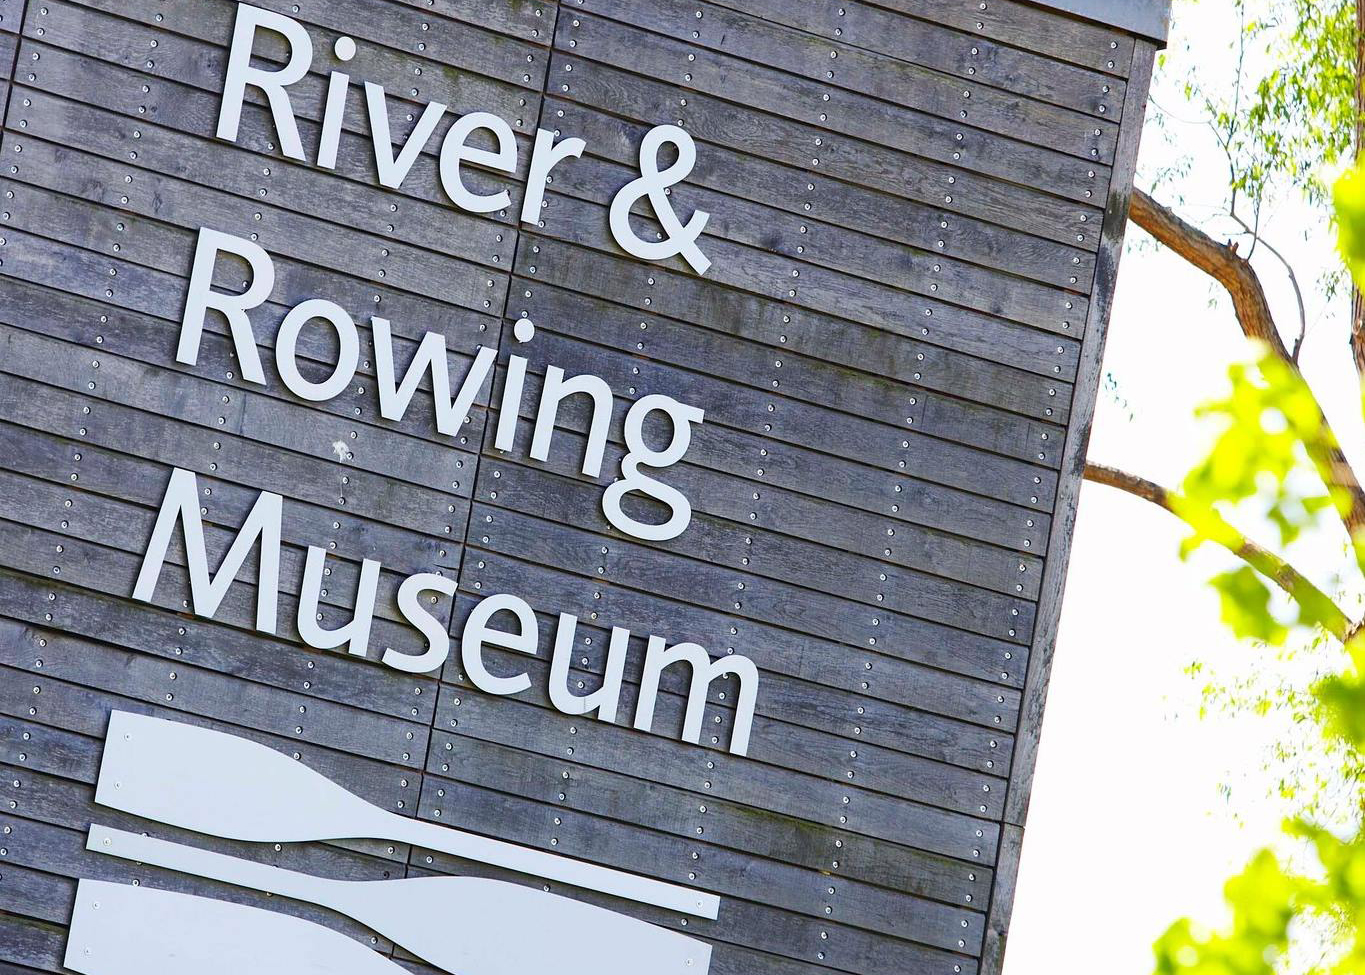 River & Rowing Museum, Oxfordshire. Staycation Inspiration by Malvern Garden Building